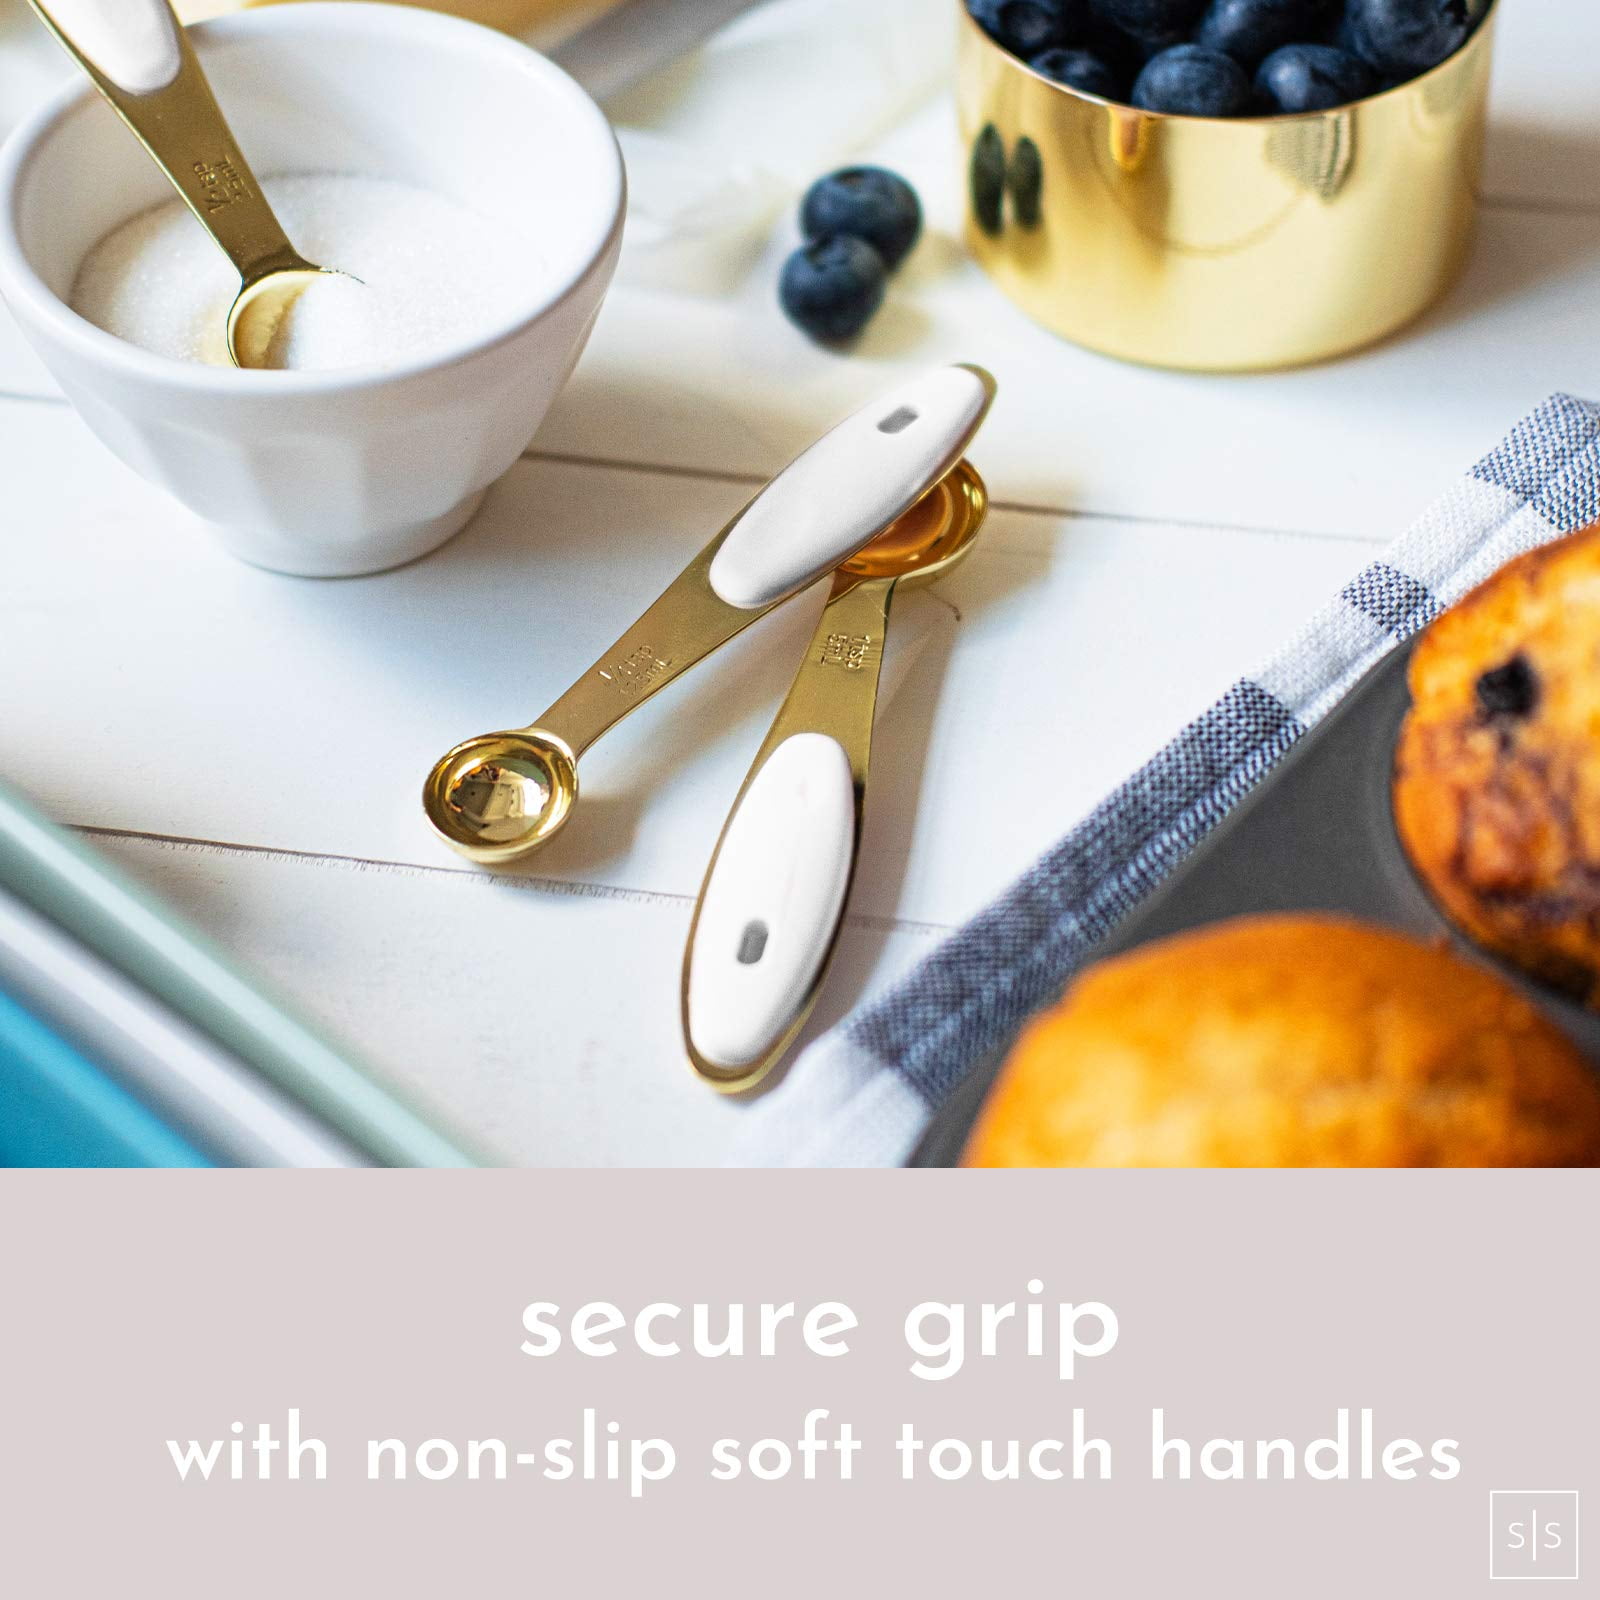 Styled Settings Modern Cups Measuring and Spoons Set, Gold - Stackable, Stylish Sturdy Stainless